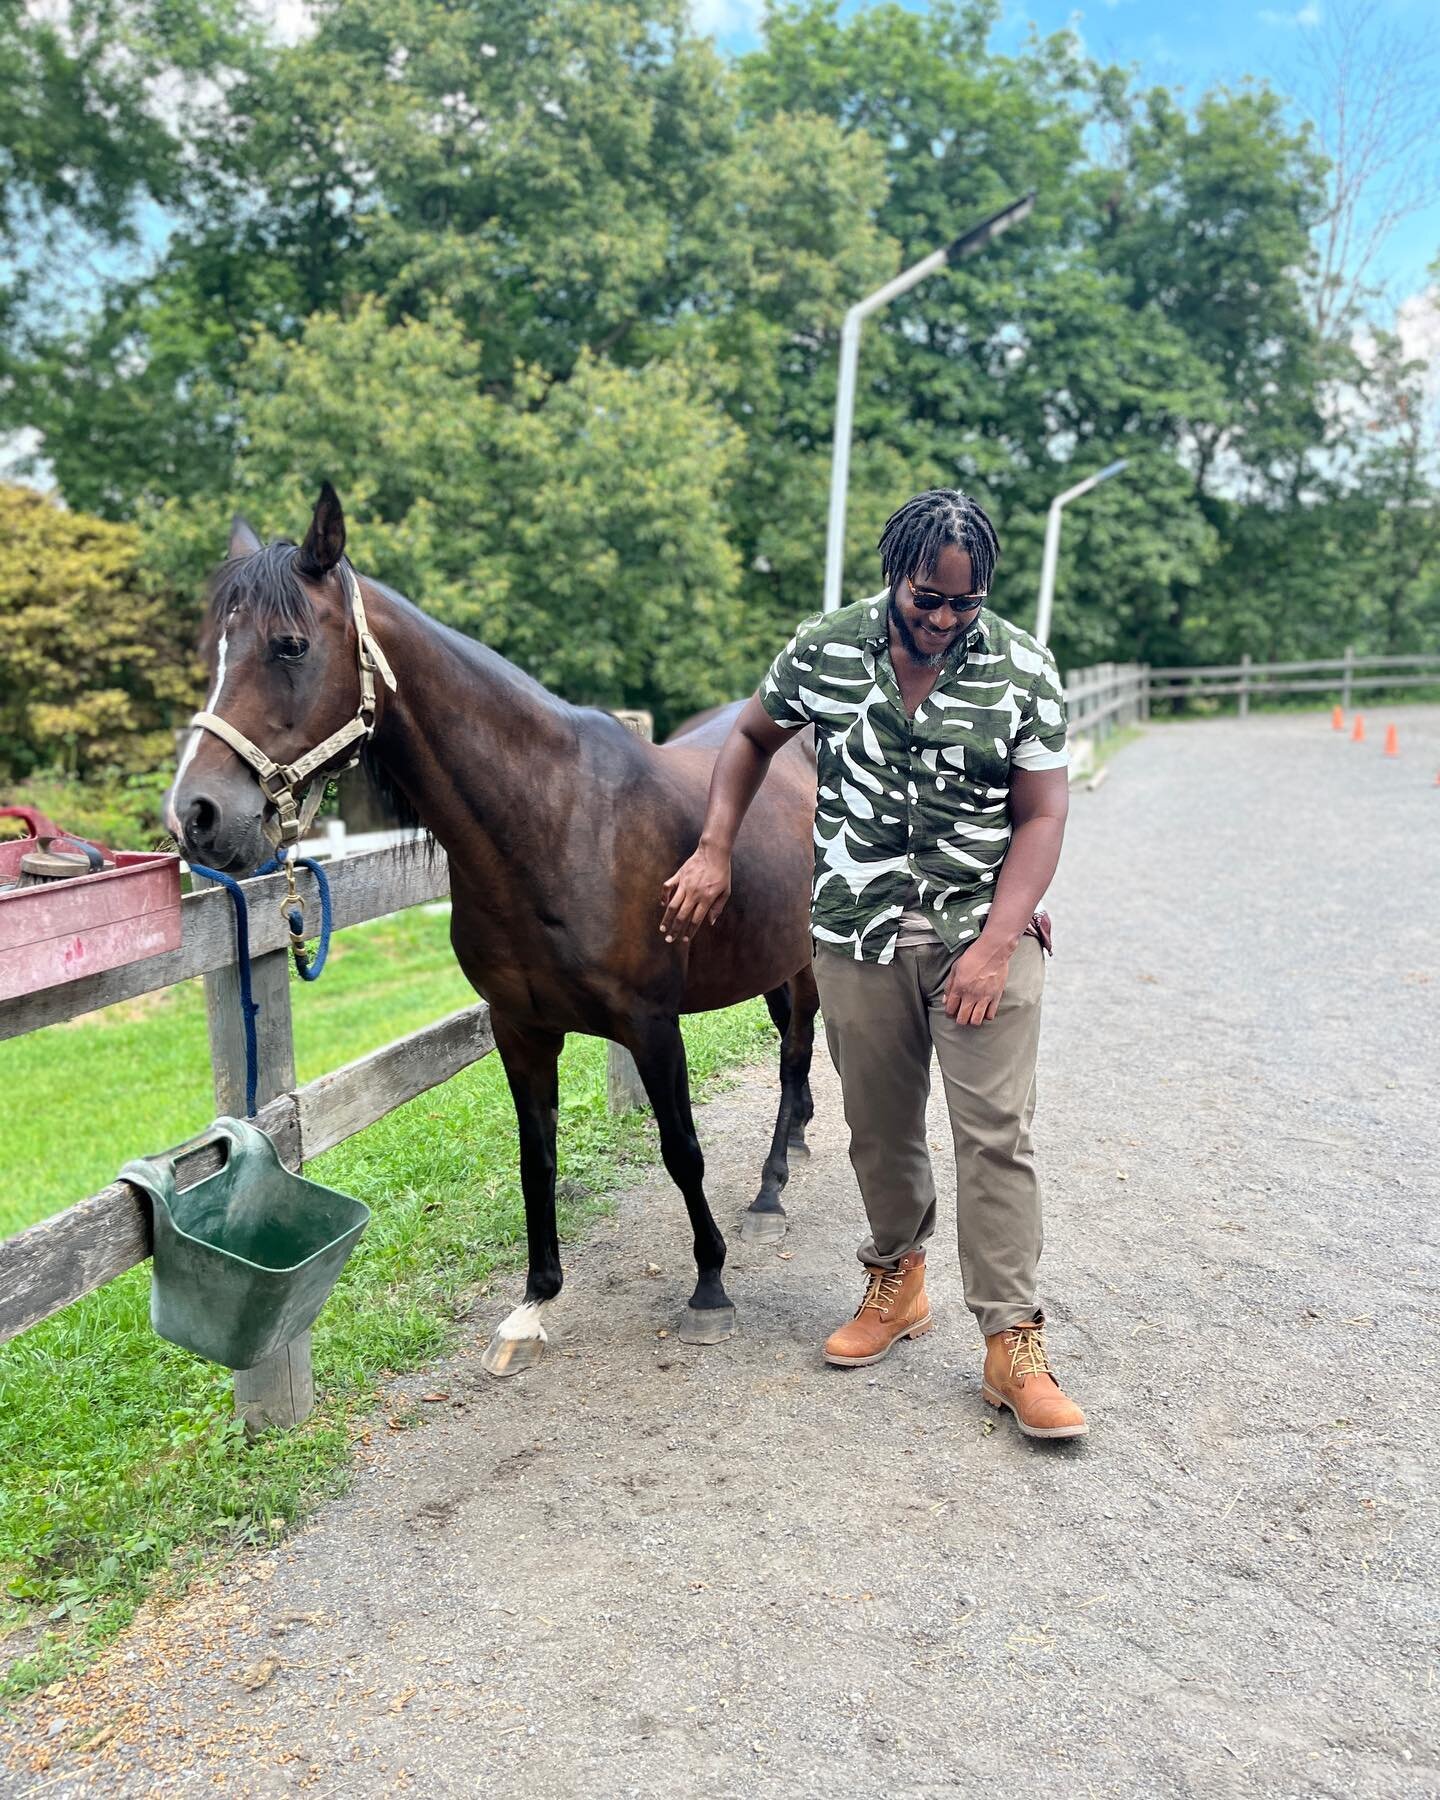 Learned a new skill and met a couple of new friends today;
(1) &ldquo;Destination&rdquo; 🐎
(2) &ldquo;Cricket&rdquo; 🐎 (#3 is also my bro Cricket, best teeth in the game lol) 
I&rsquo;m ready for a role in a Western, or Nope II